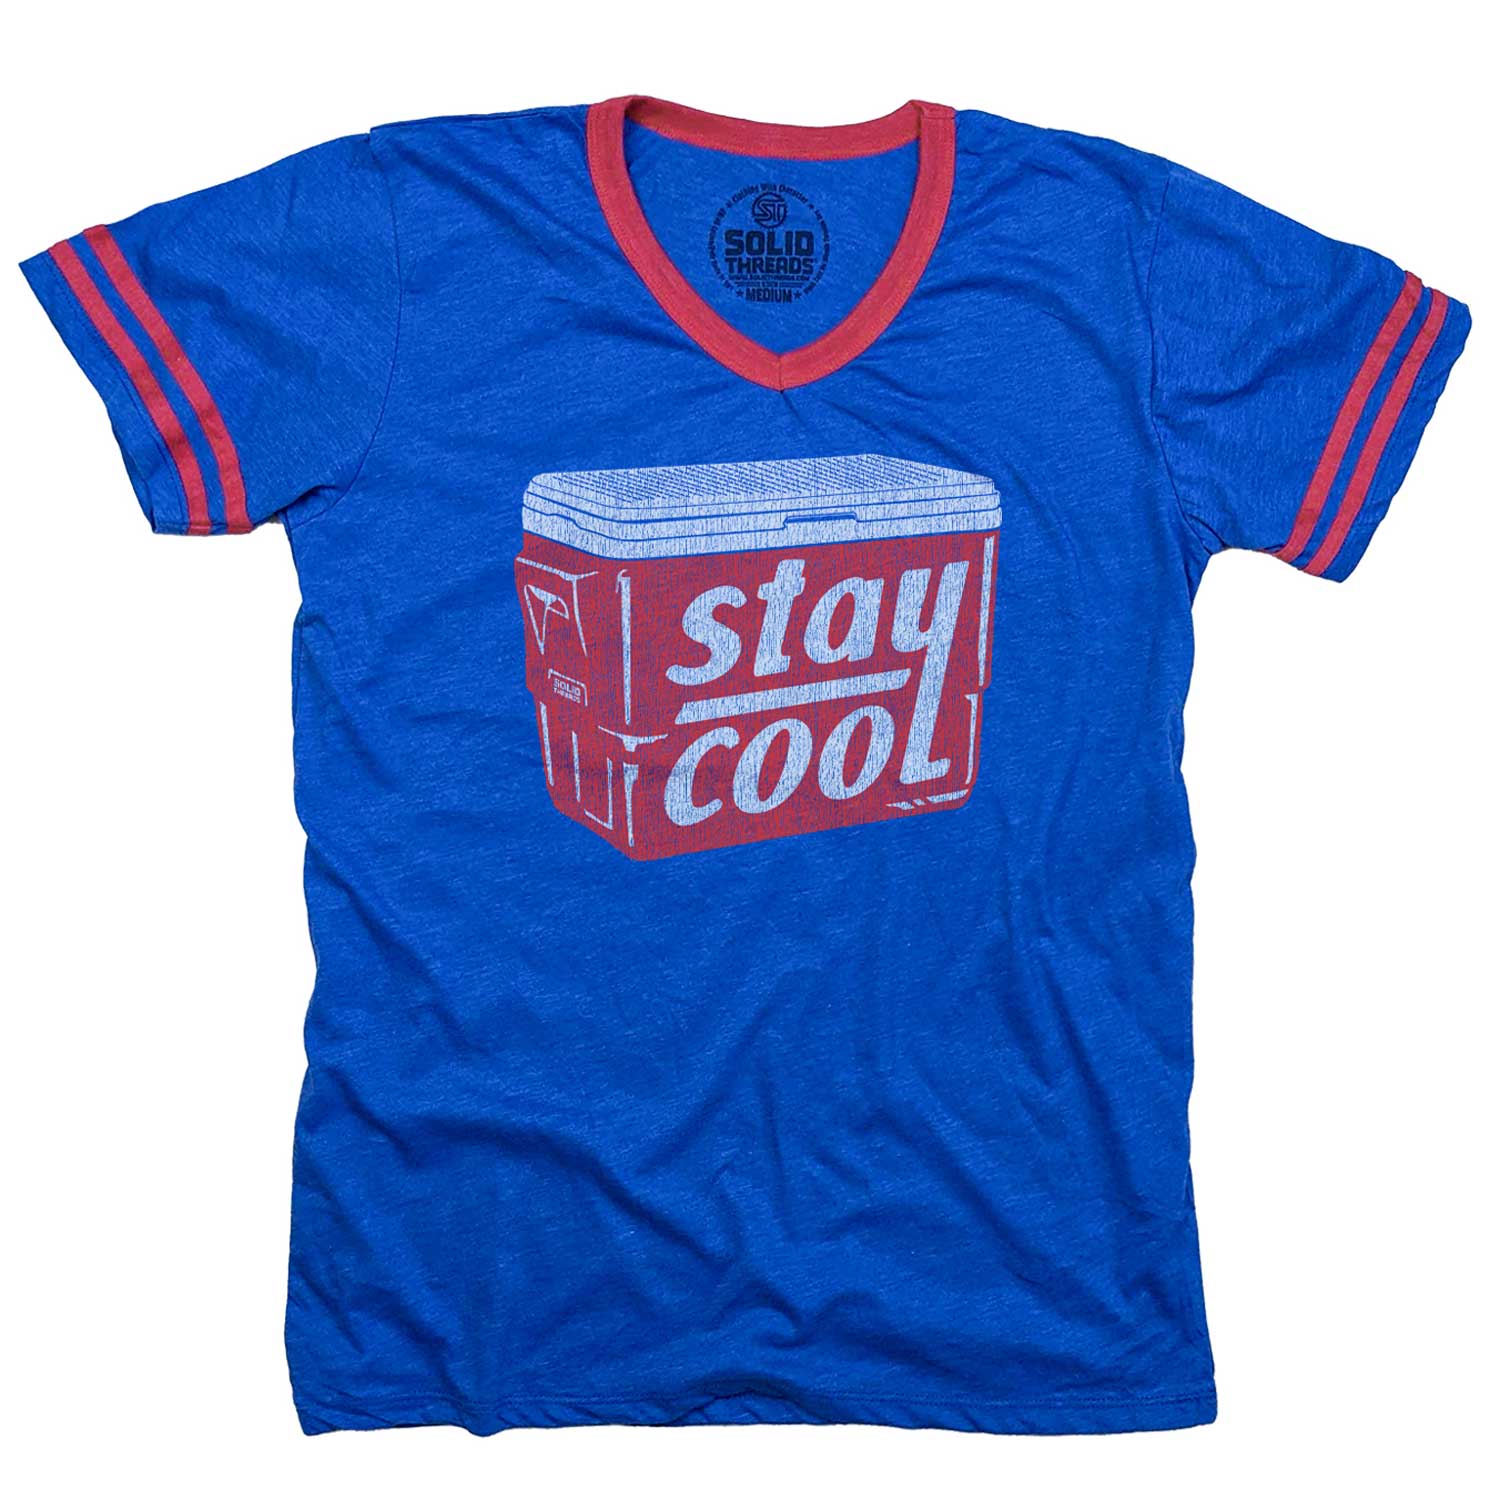 Cool Vintage & Retro T-shirts  SOLID THREADS Best Selling Tees